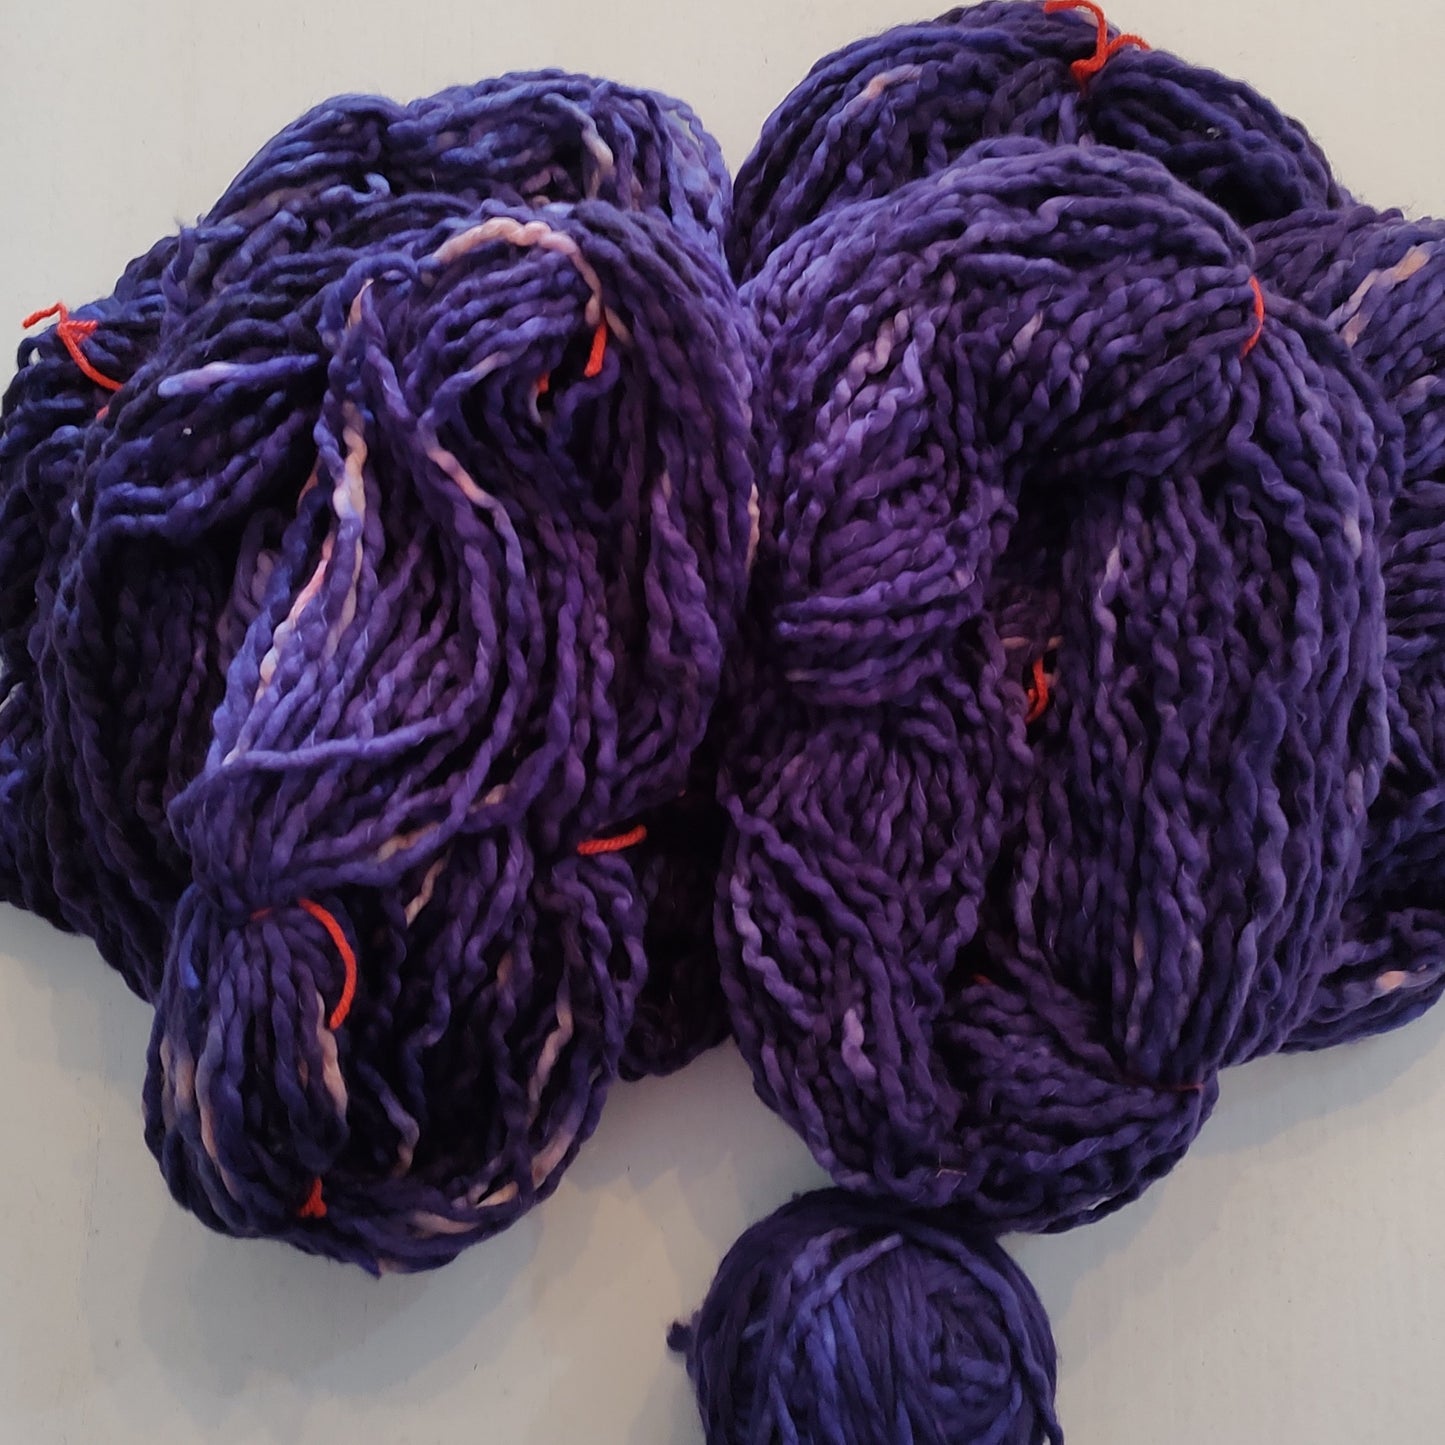 Yarn - Unknown hand-dyed